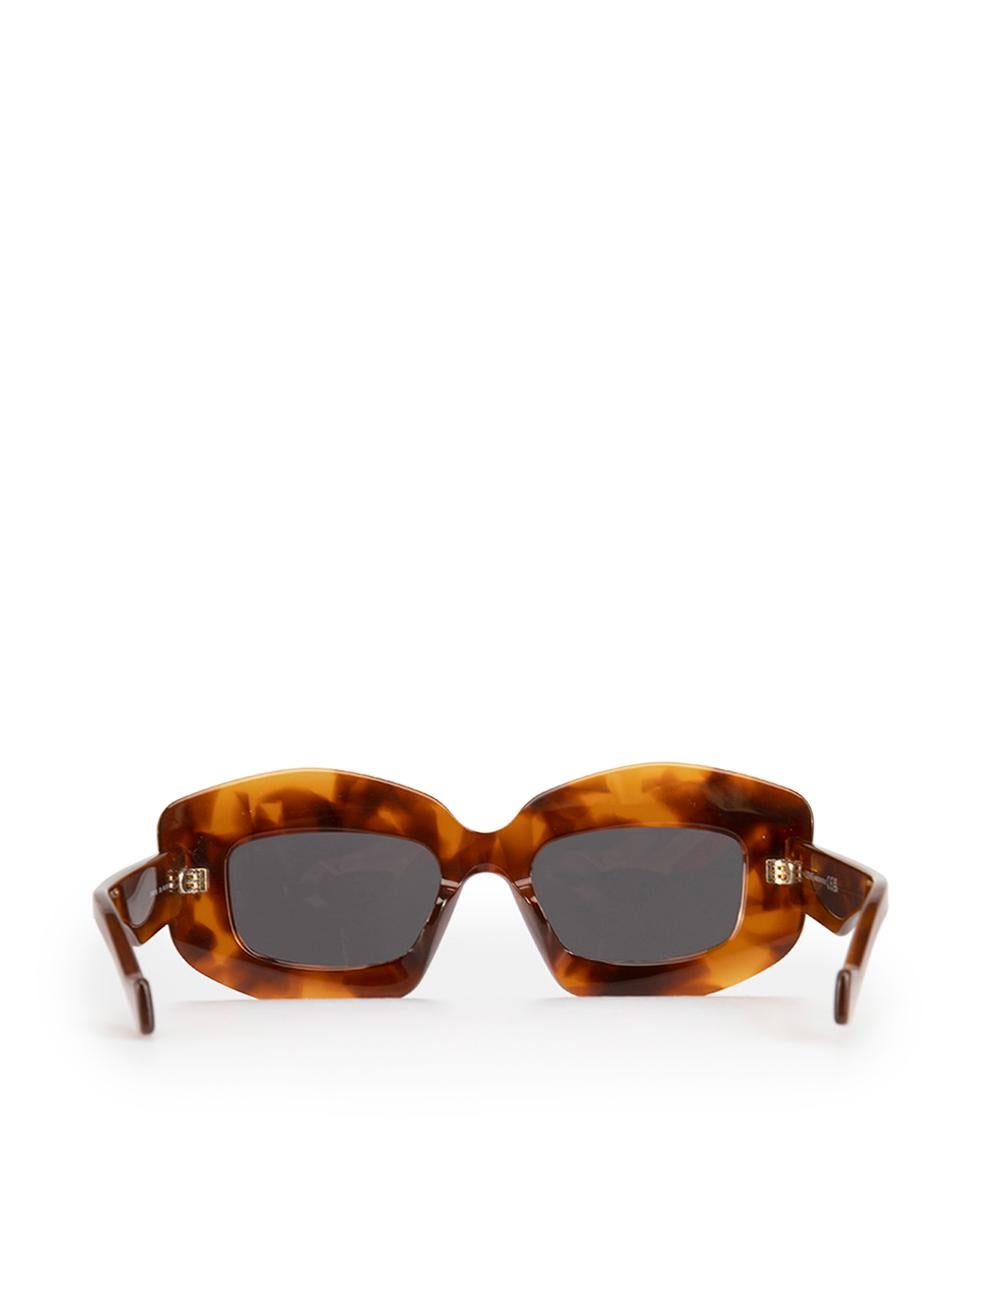 Loewe Brown Tortoiseshell Anagram Sunglasses In Excellent Condition In London, GB